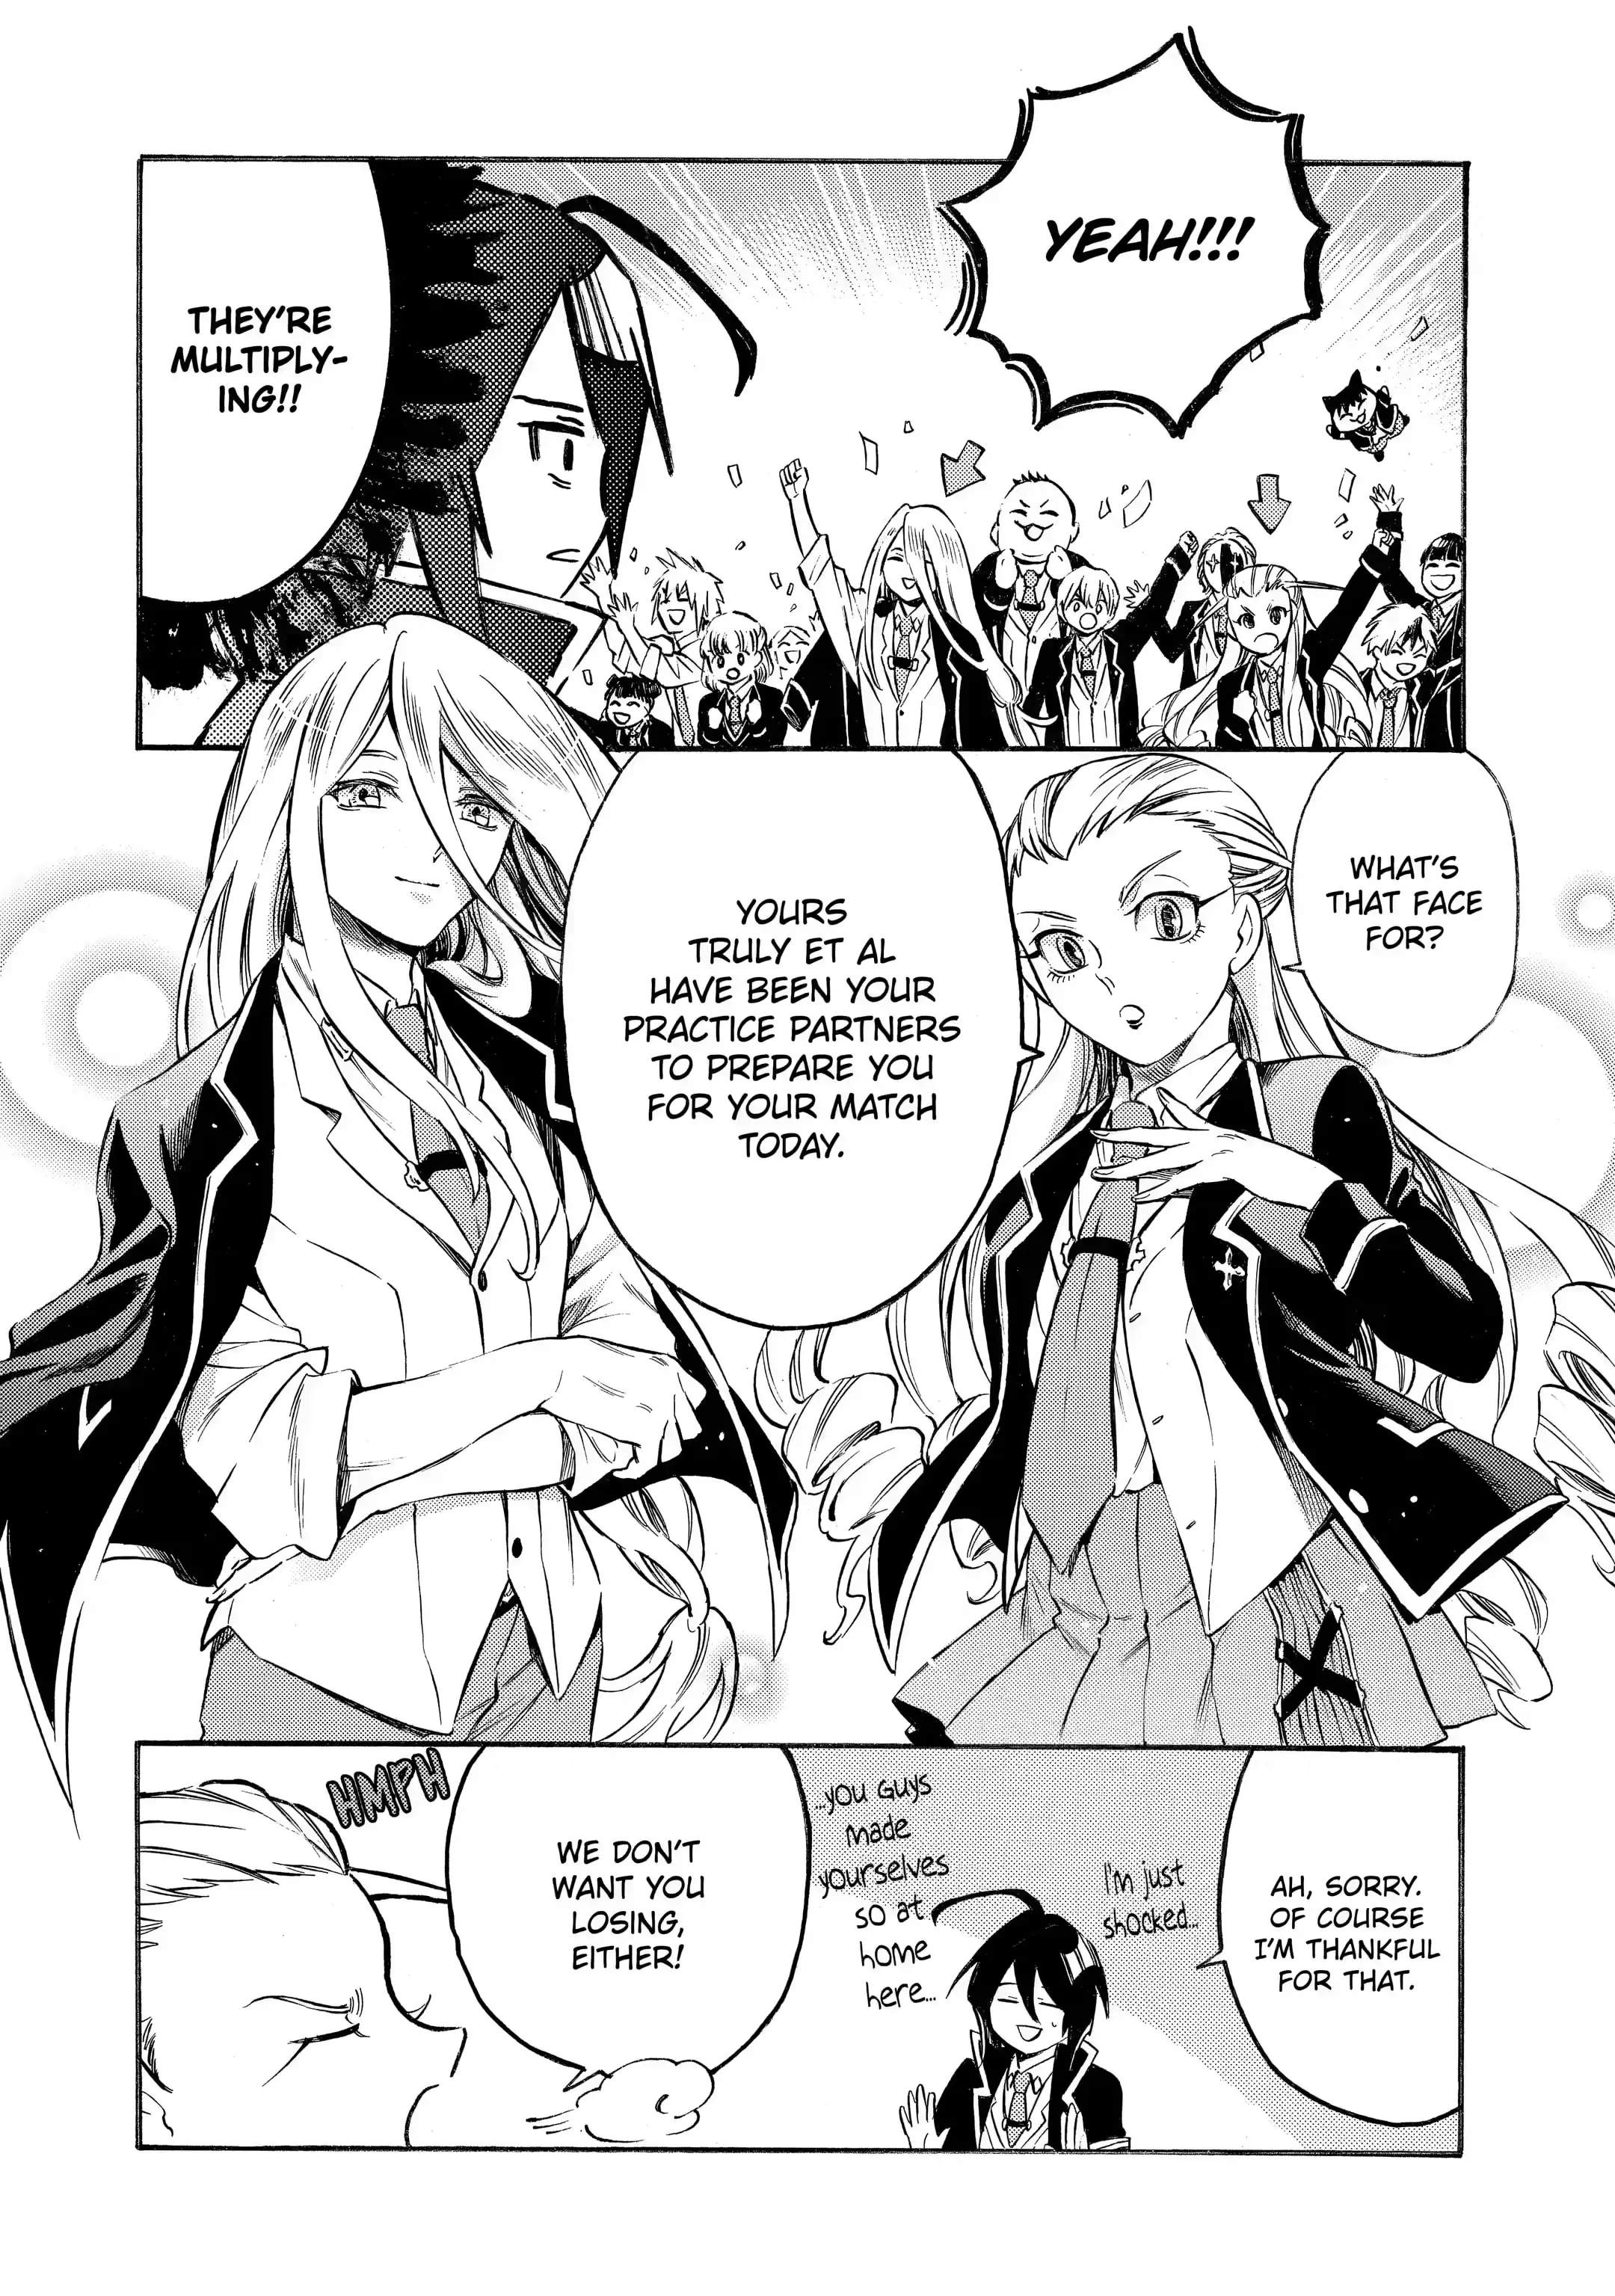 Reincarnation of the Unrivalled Time Mage: The Underachiever at the Magic Academy Turns Out to Be the Strongest Mage Who Controls Time! Chapter 6.1-eng-li - Page 9